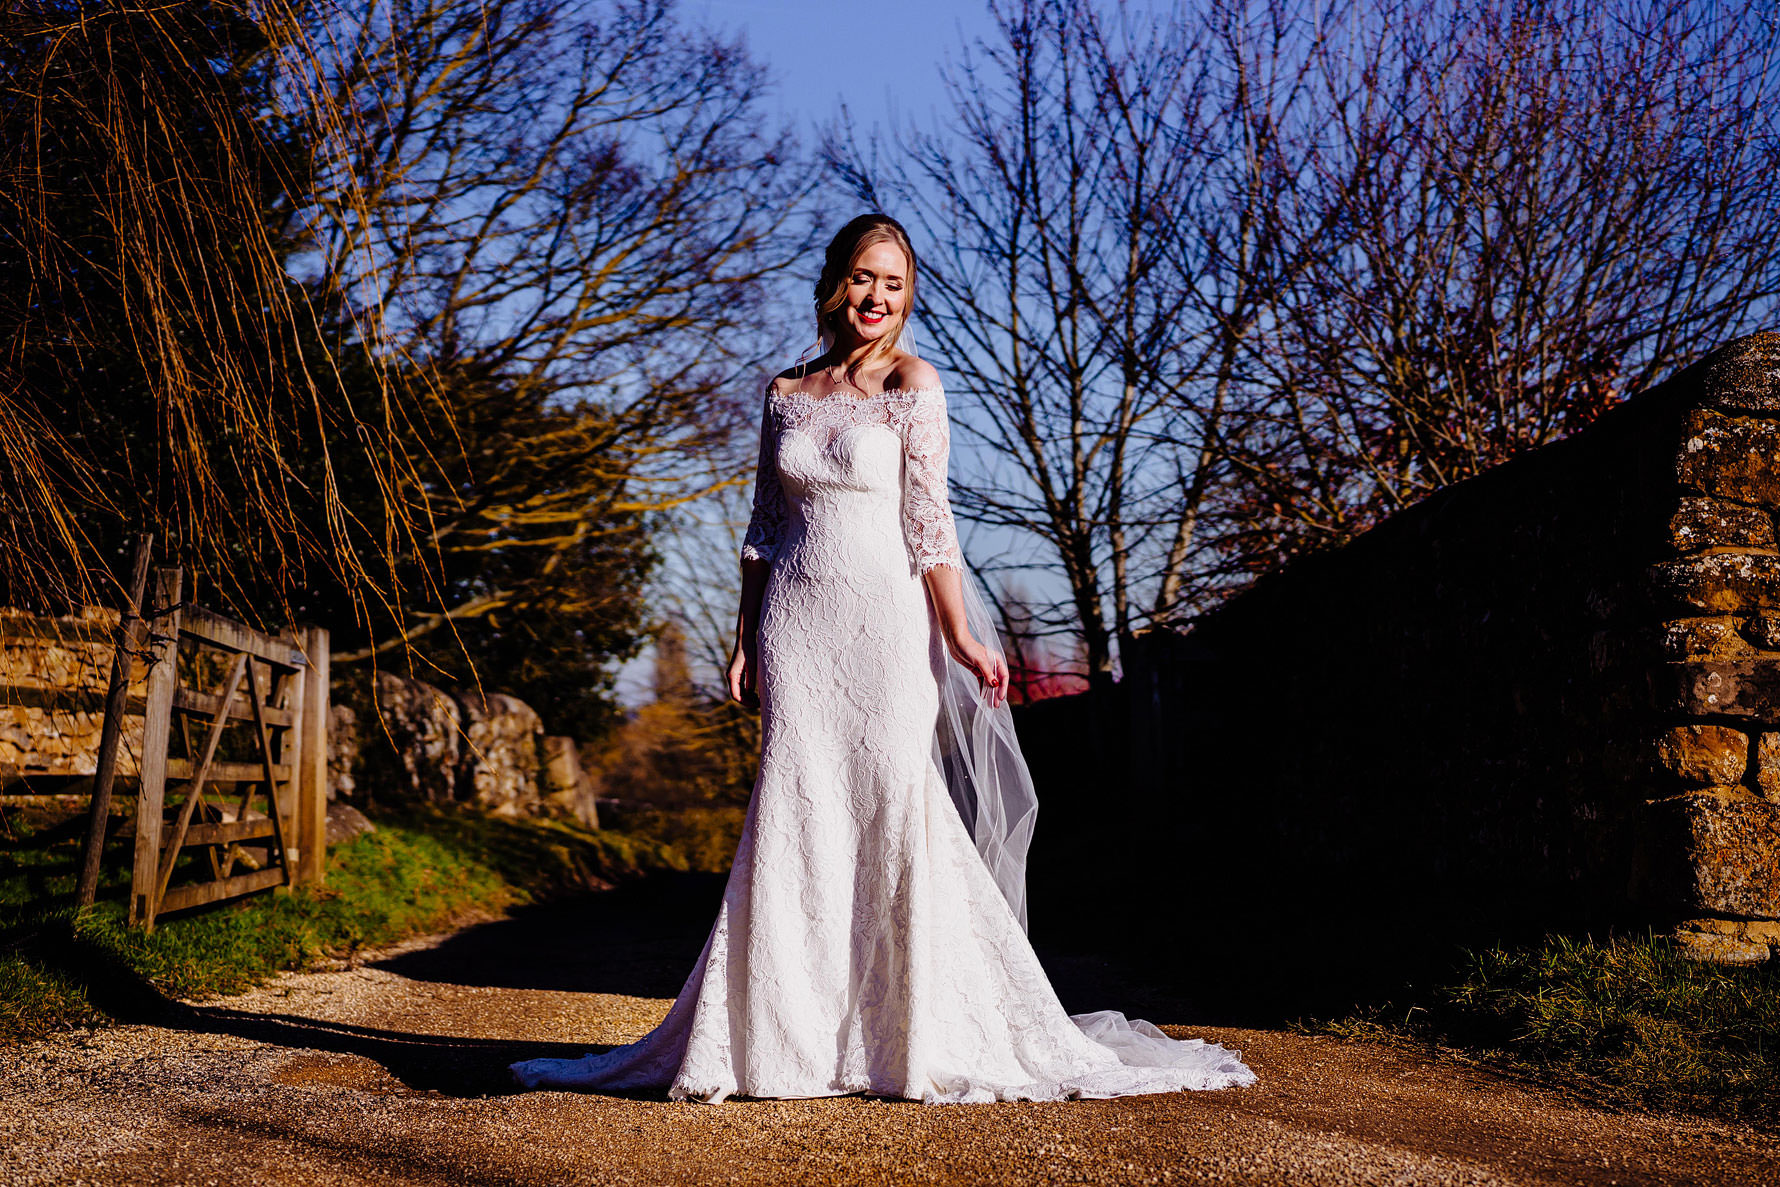 colour photography at dodford manor